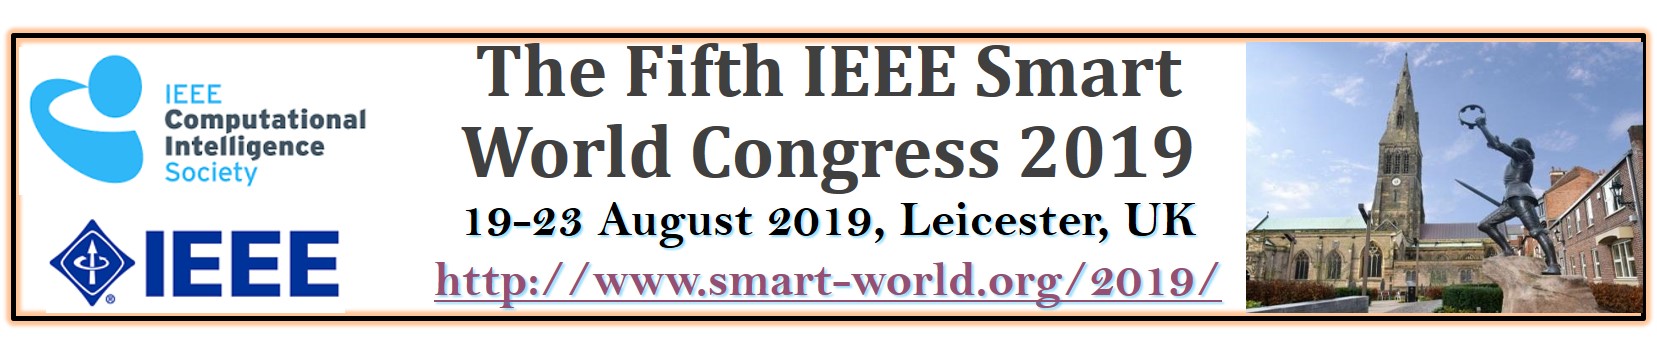 The 5th IEEE Smart World Congress, Leicester, United Kingdom